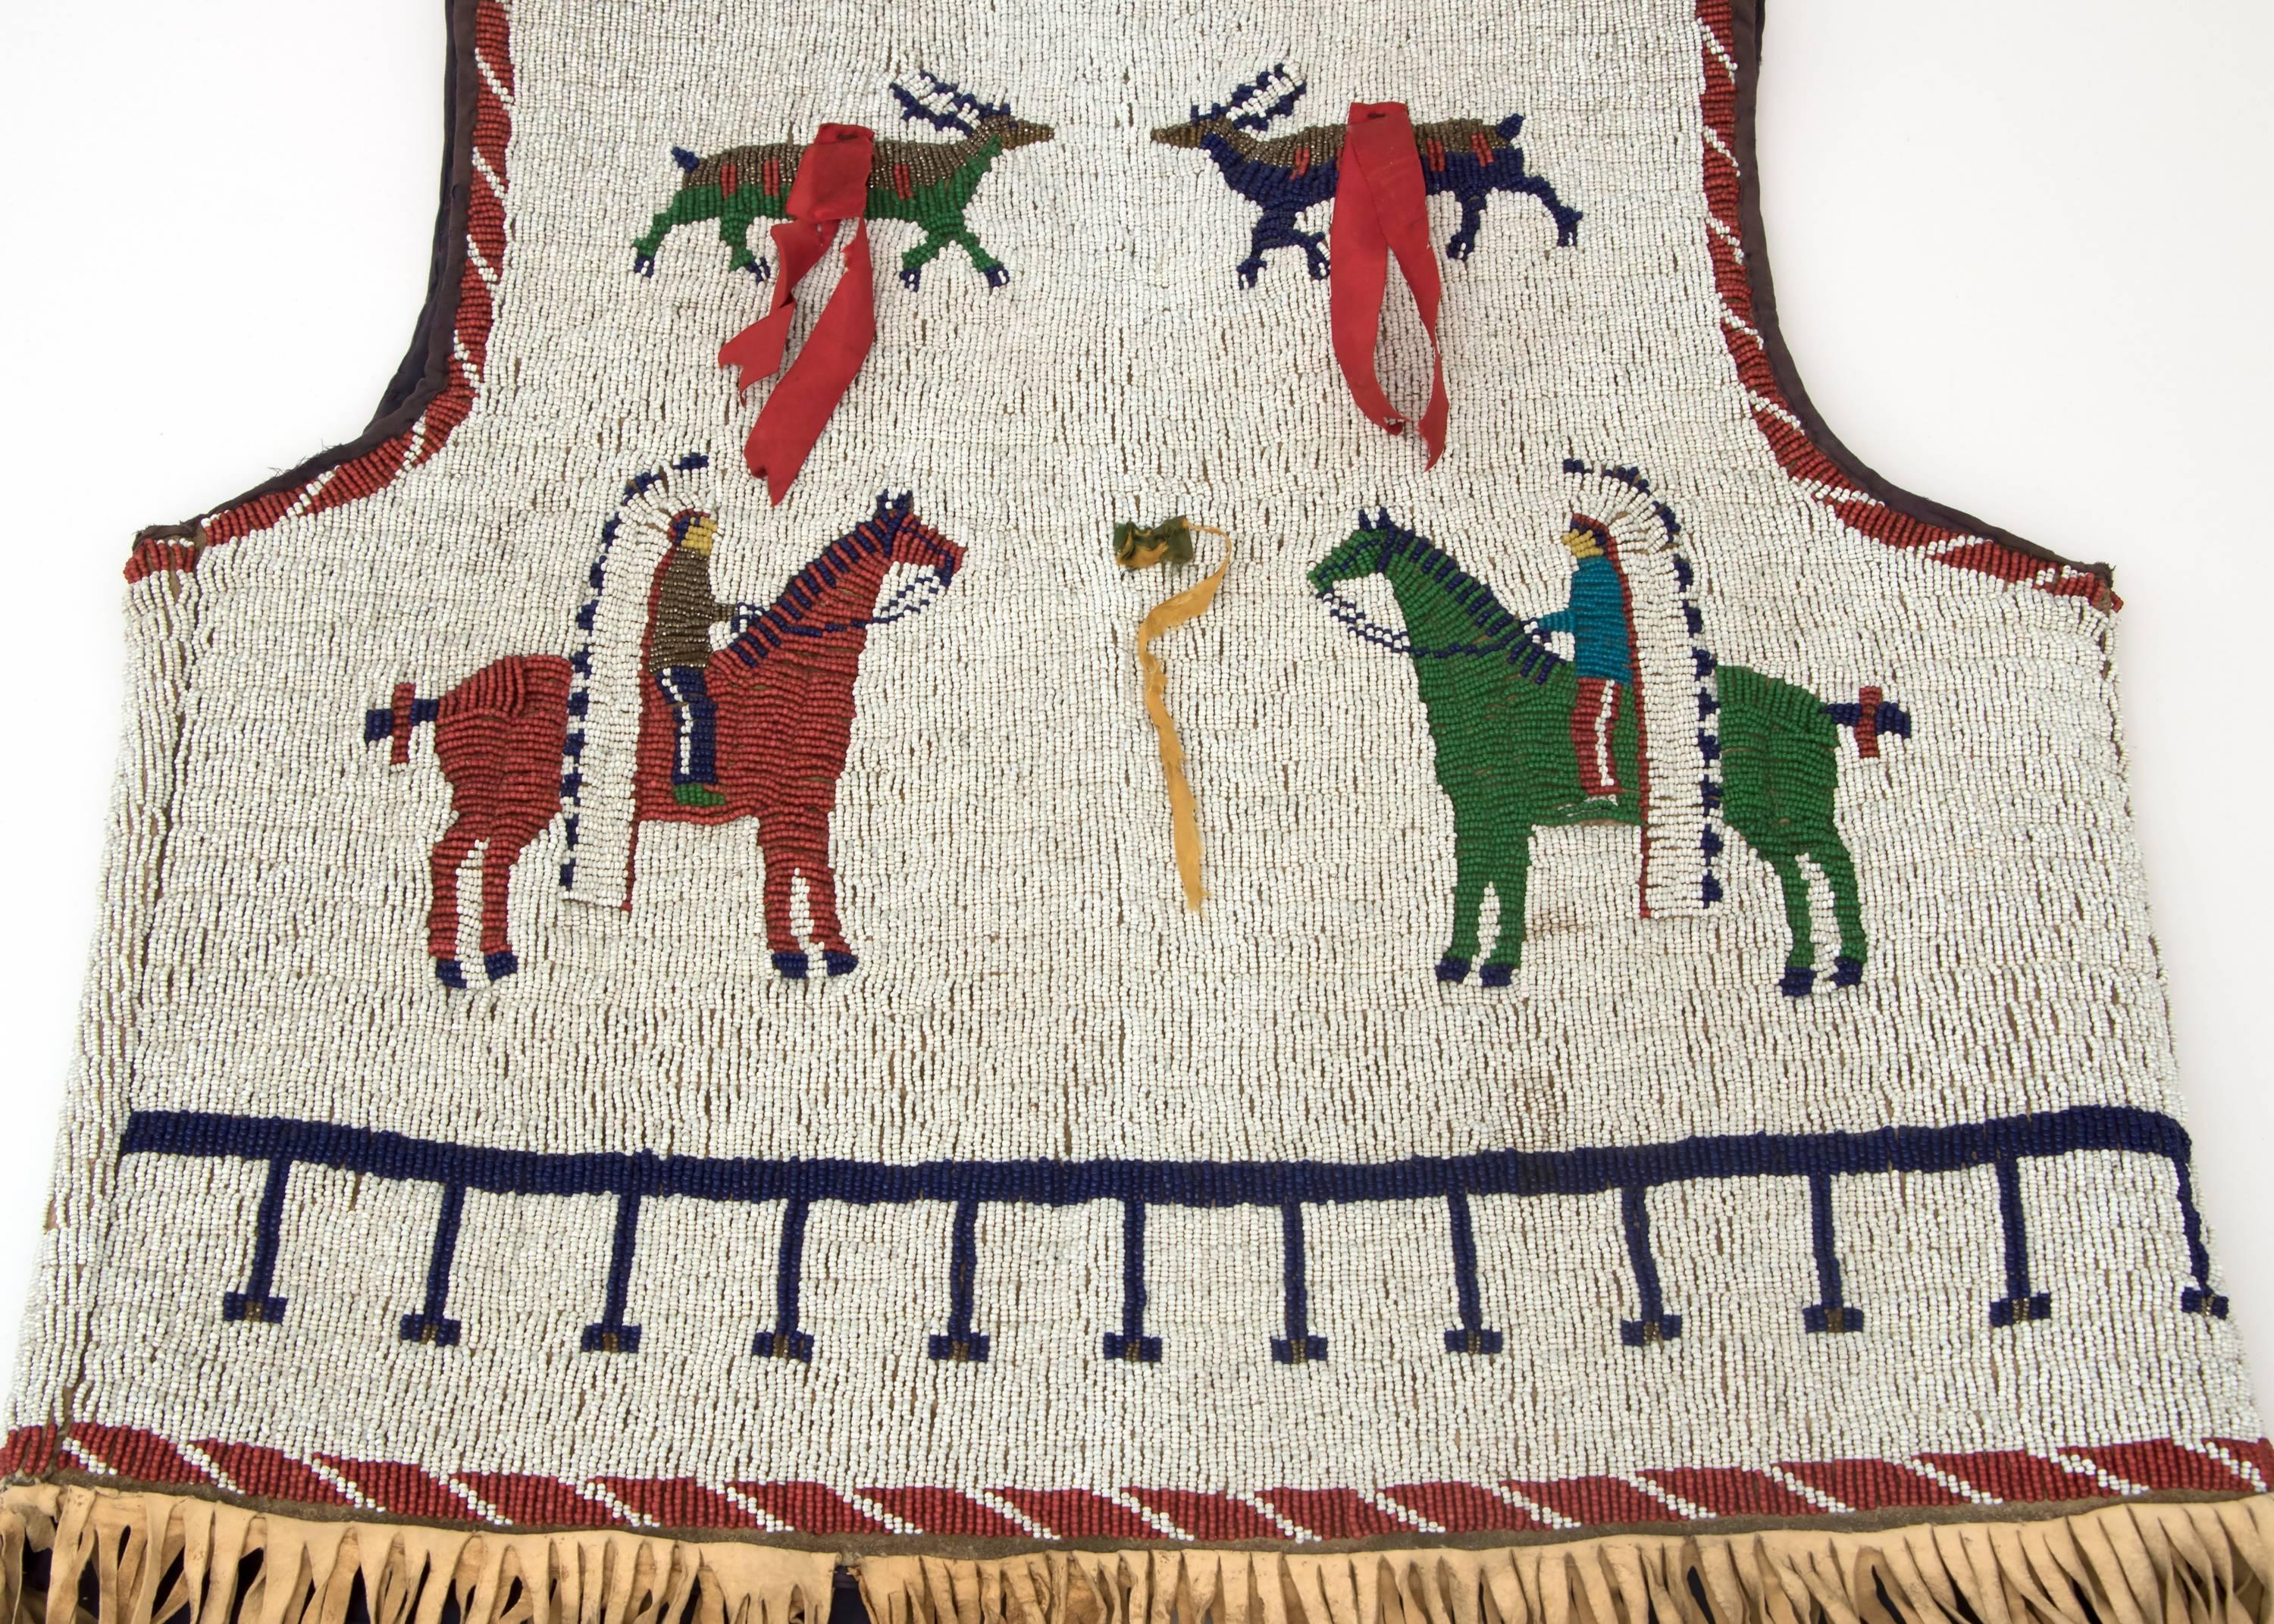 Pictorial plains/American Indian vest fully beaded and fringed. Depicting natives on horseback with feather headdresses and elk/deer.

Constructed of Native tanned hide with glass trade beads, cloth and ribbon. Created at the end of the 19th or